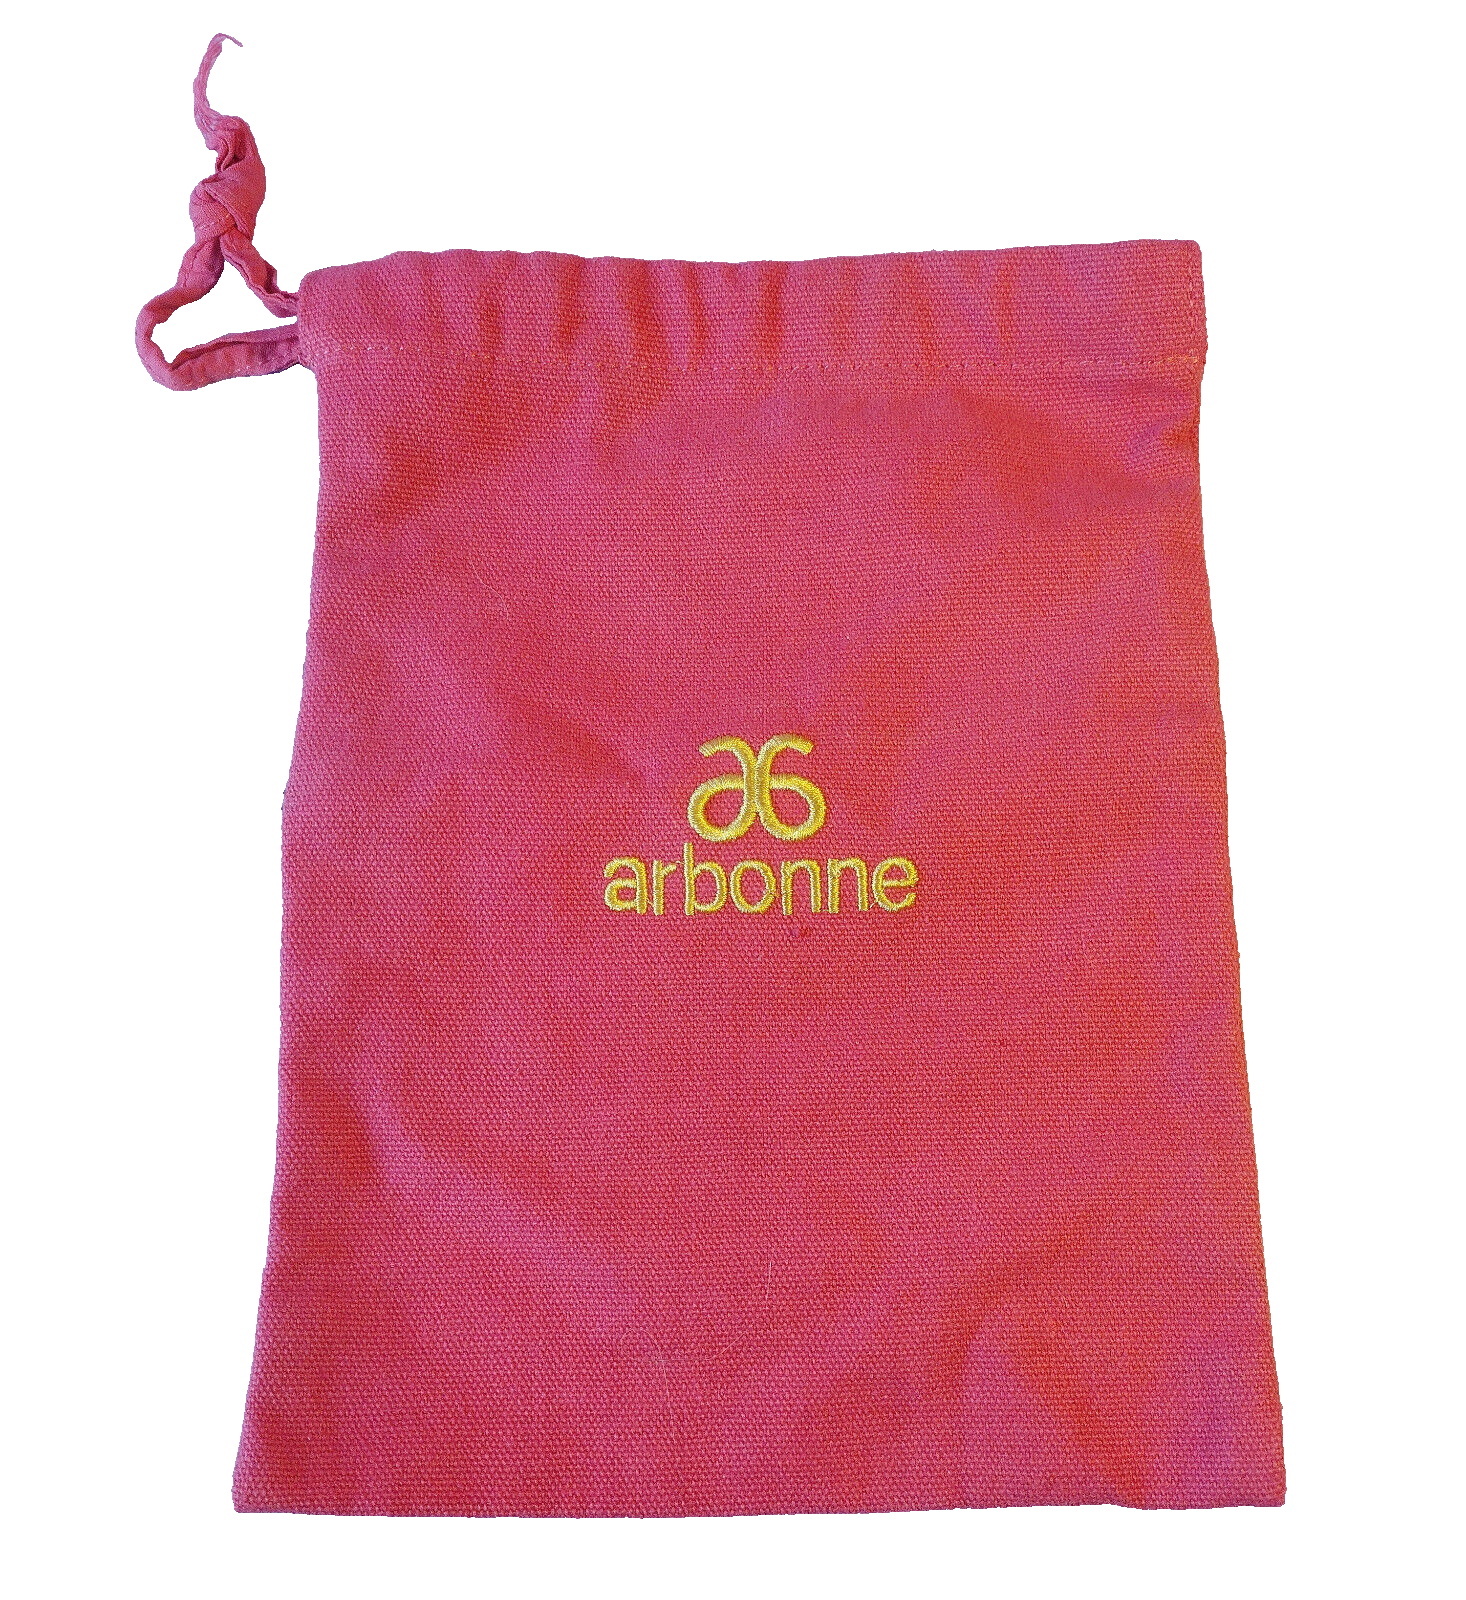 ARBONNE Pink Drawstring Gift Bag Pouch Embroidered Gold Logo 9.5 Inch x 7 Inch